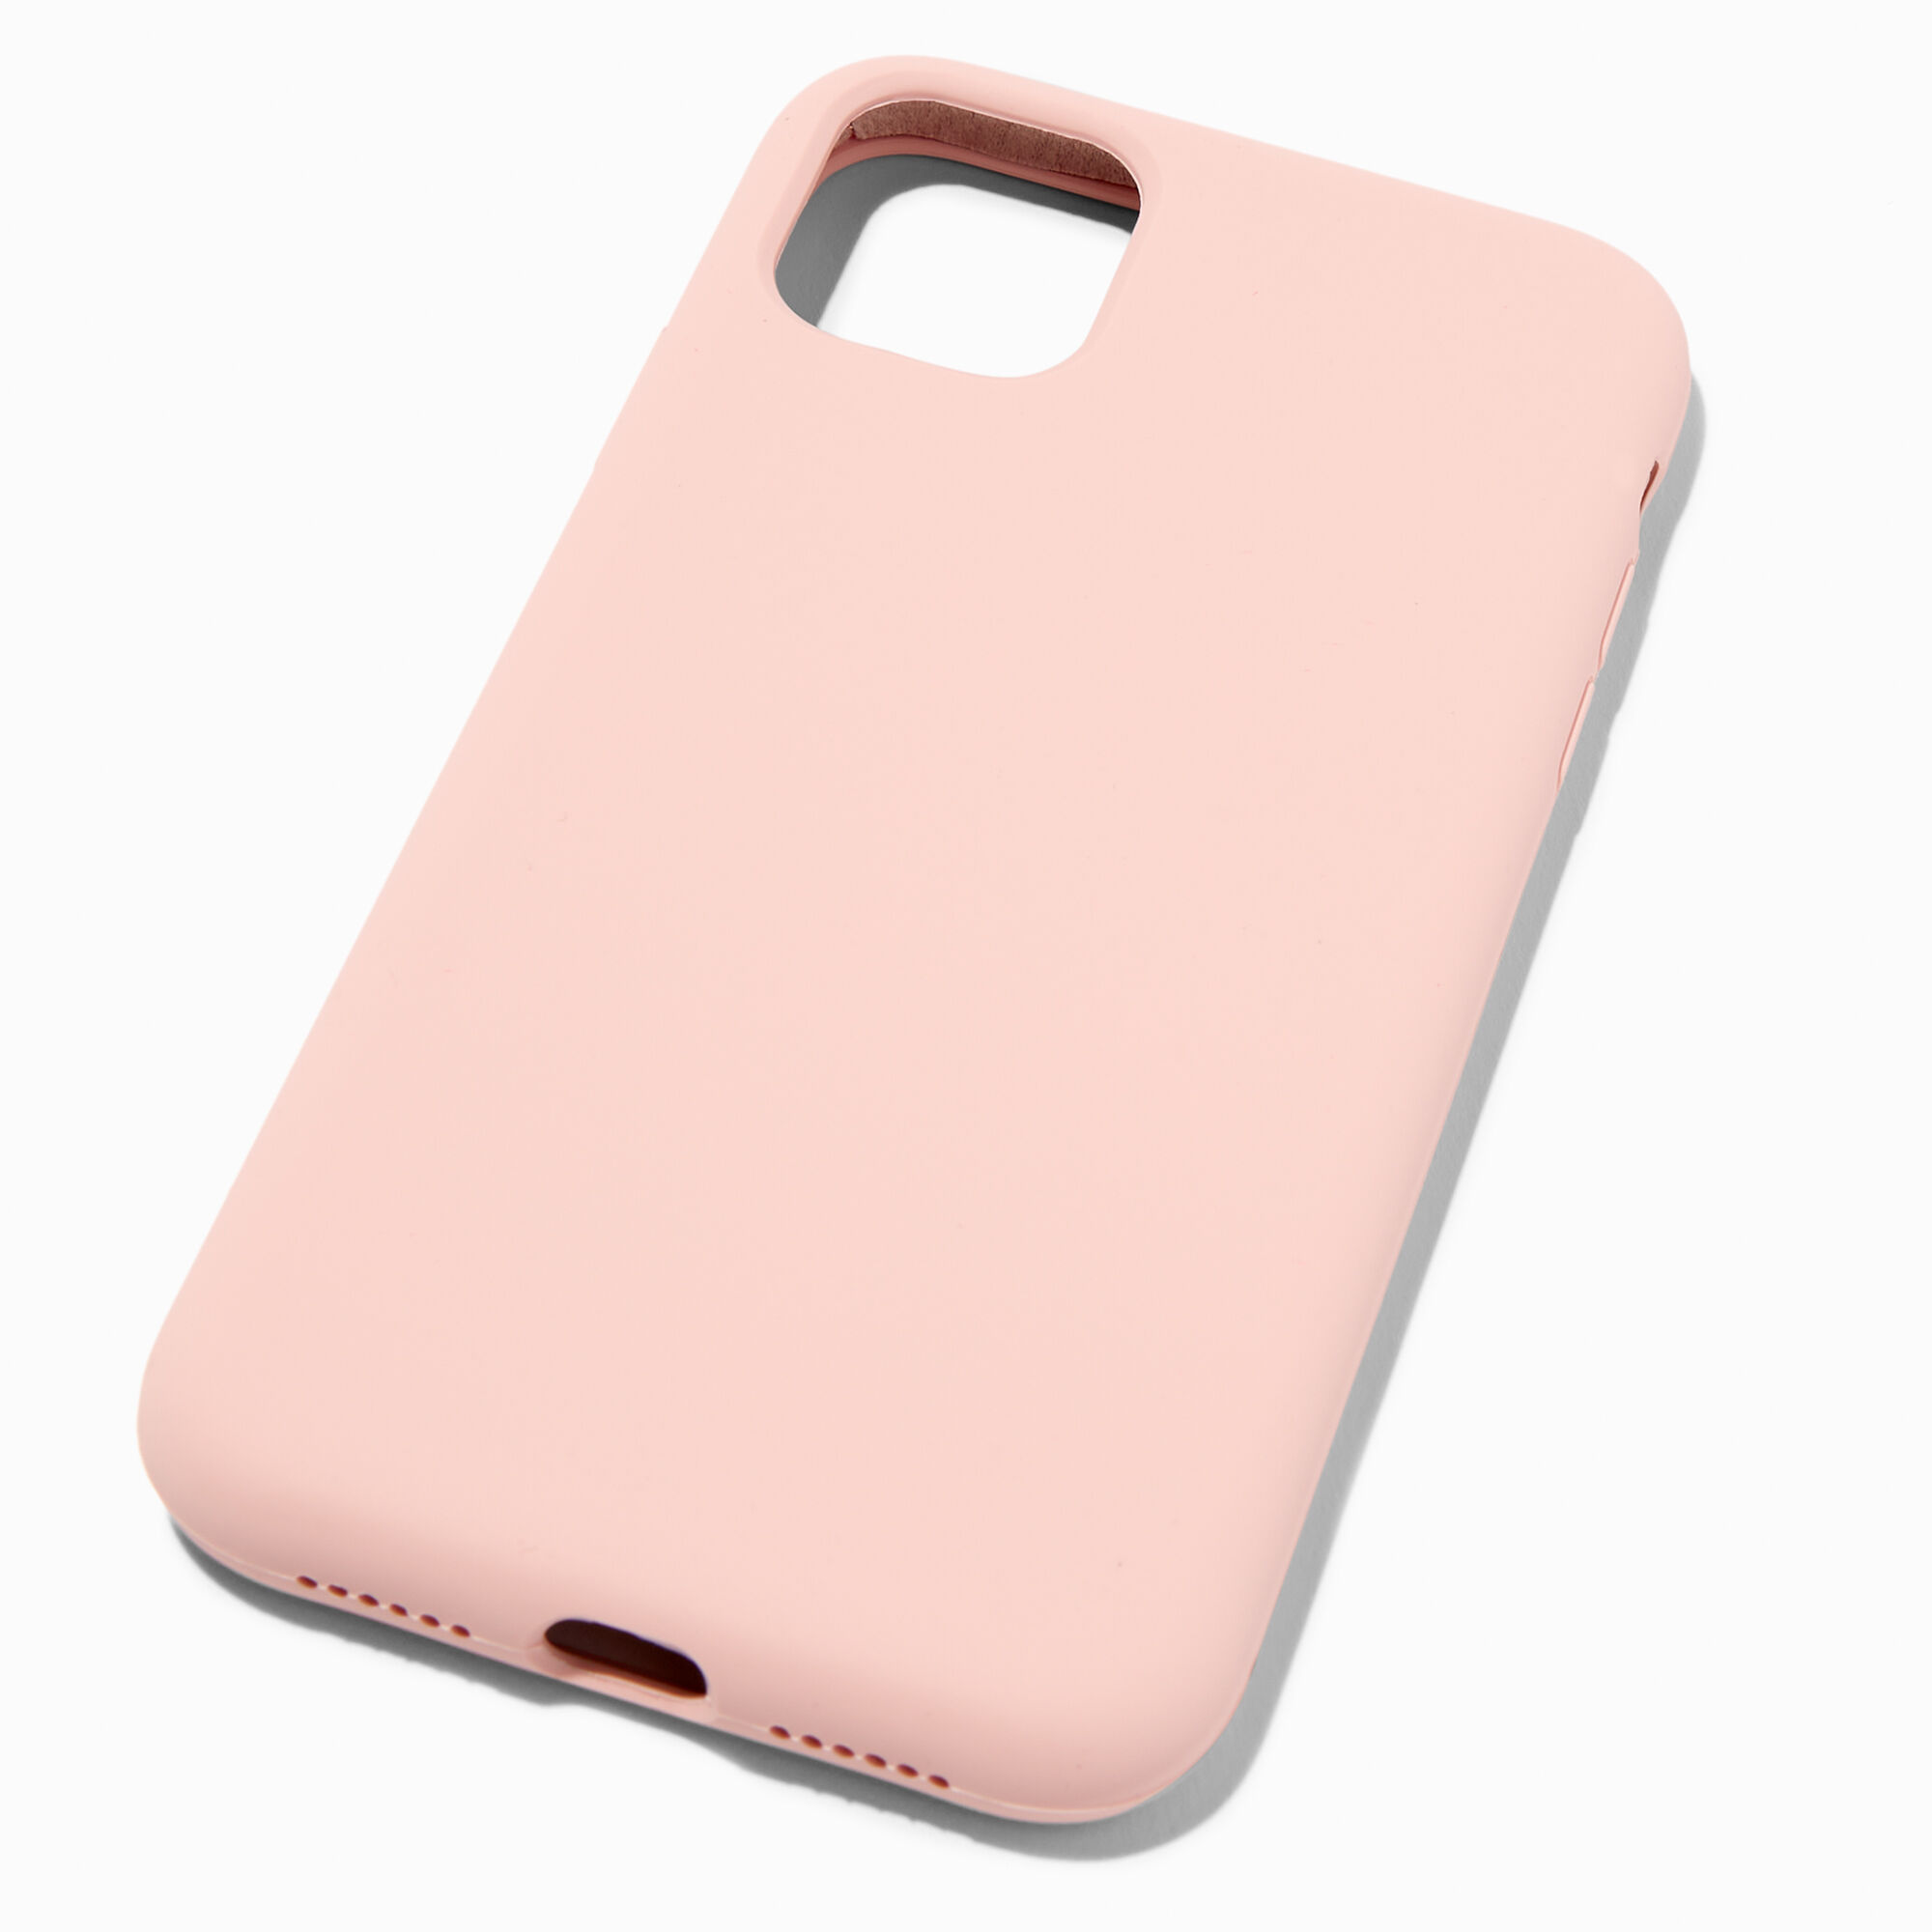 View Claires Solid Blush Silicone Phone Case Fits Iphone 11 Pink information